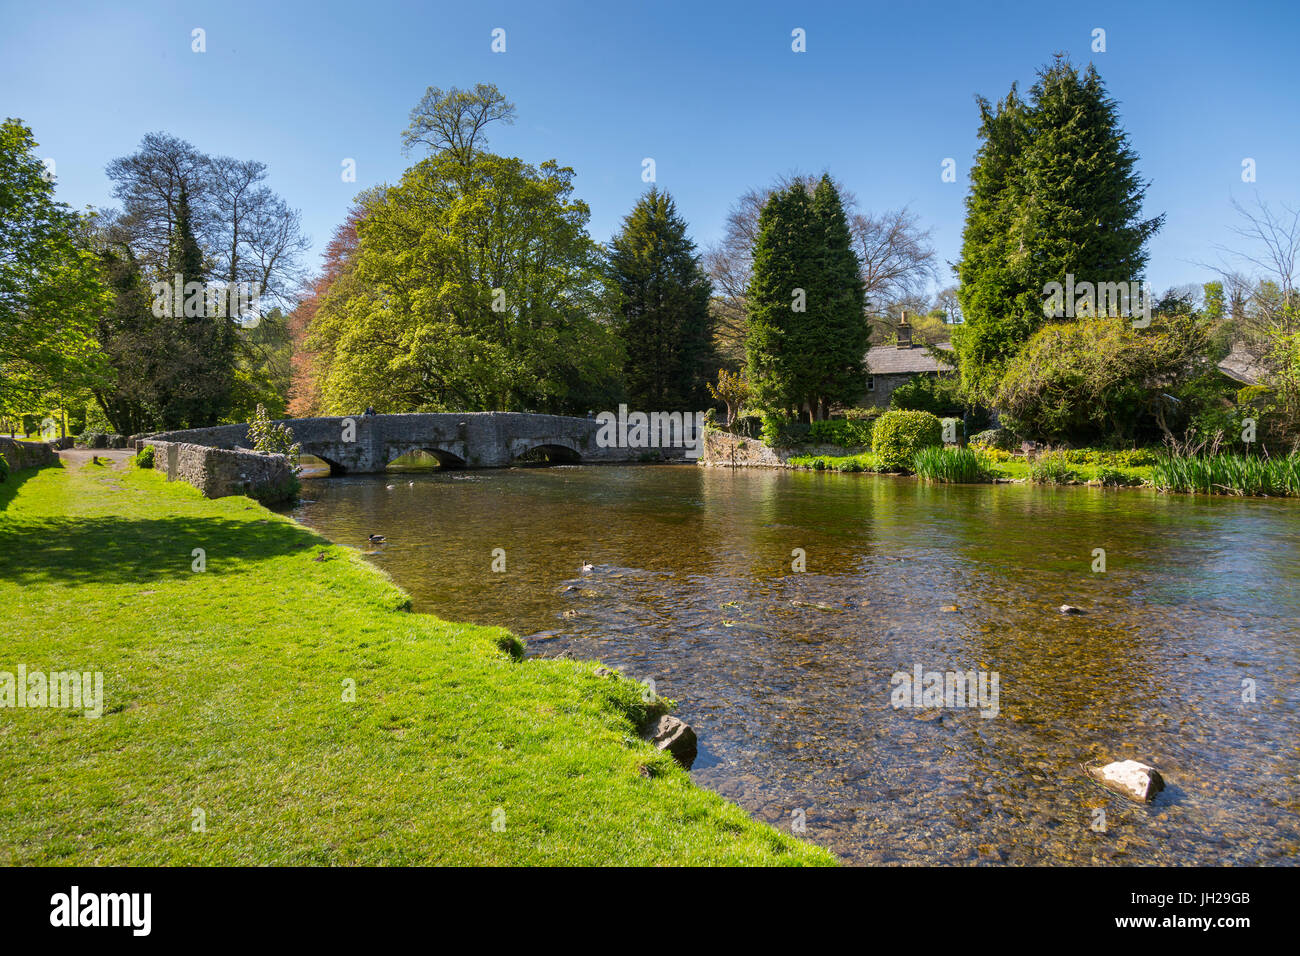 The River Wye and Sheepwash Bridge in Ashford in the water in springtime, Derbyshire Dales, Derbyshire, England, United Kingdom Stock Photo